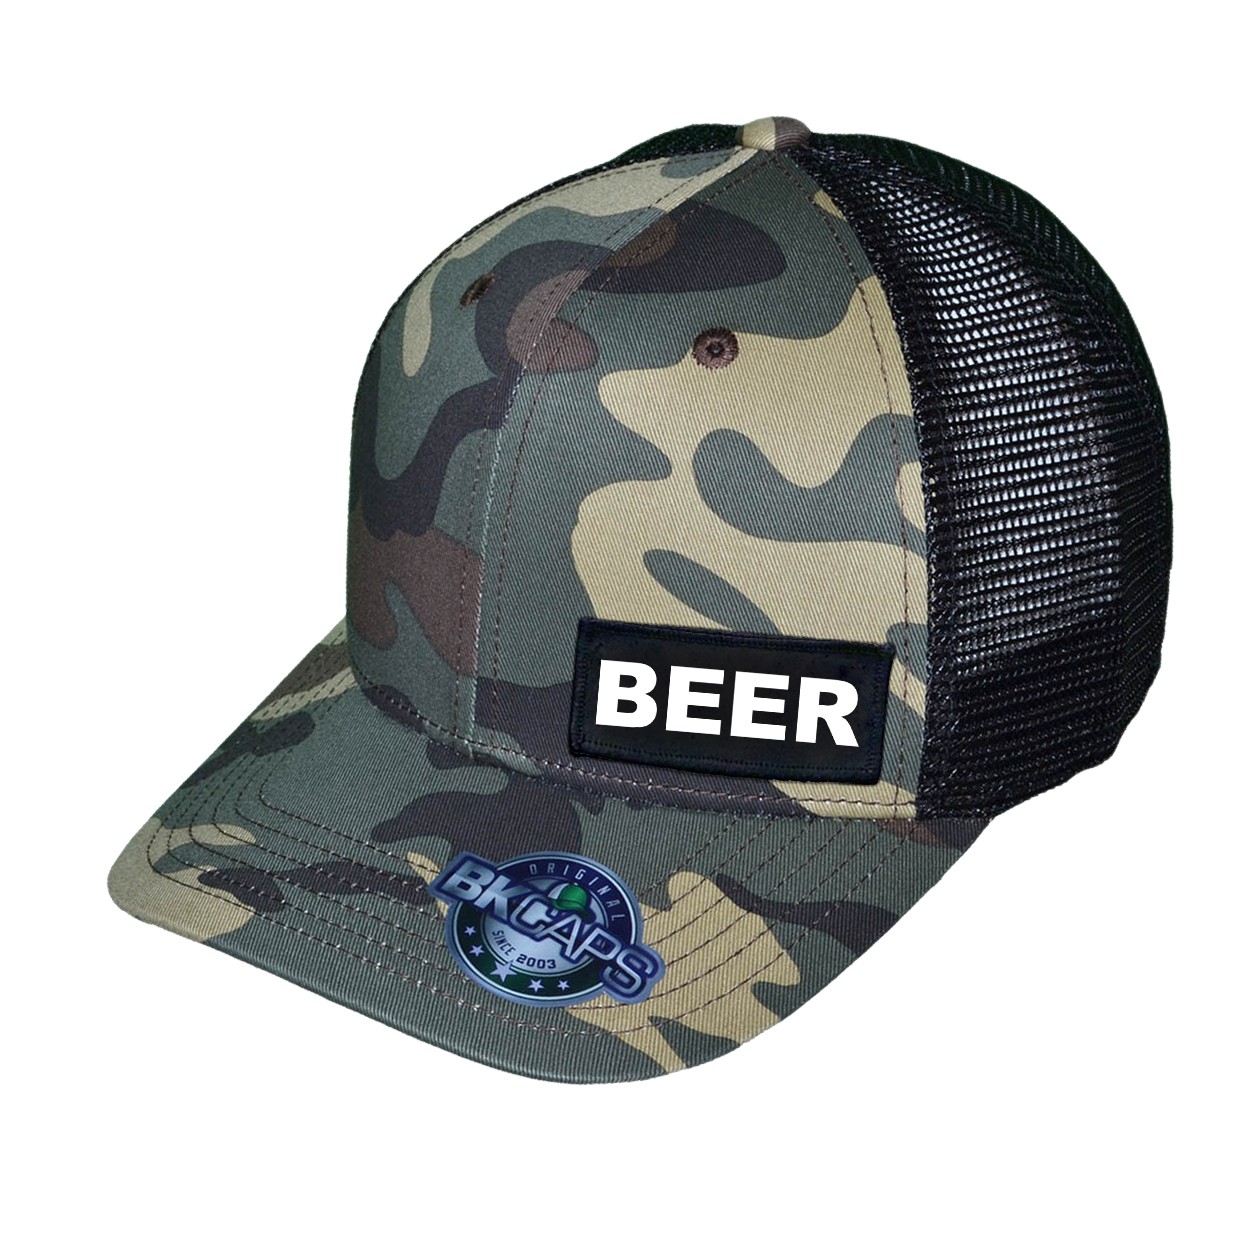 Beer Brand Logo Night Out Woven Patch Snapback Trucker Hat Khaki/Camo (White Logo)